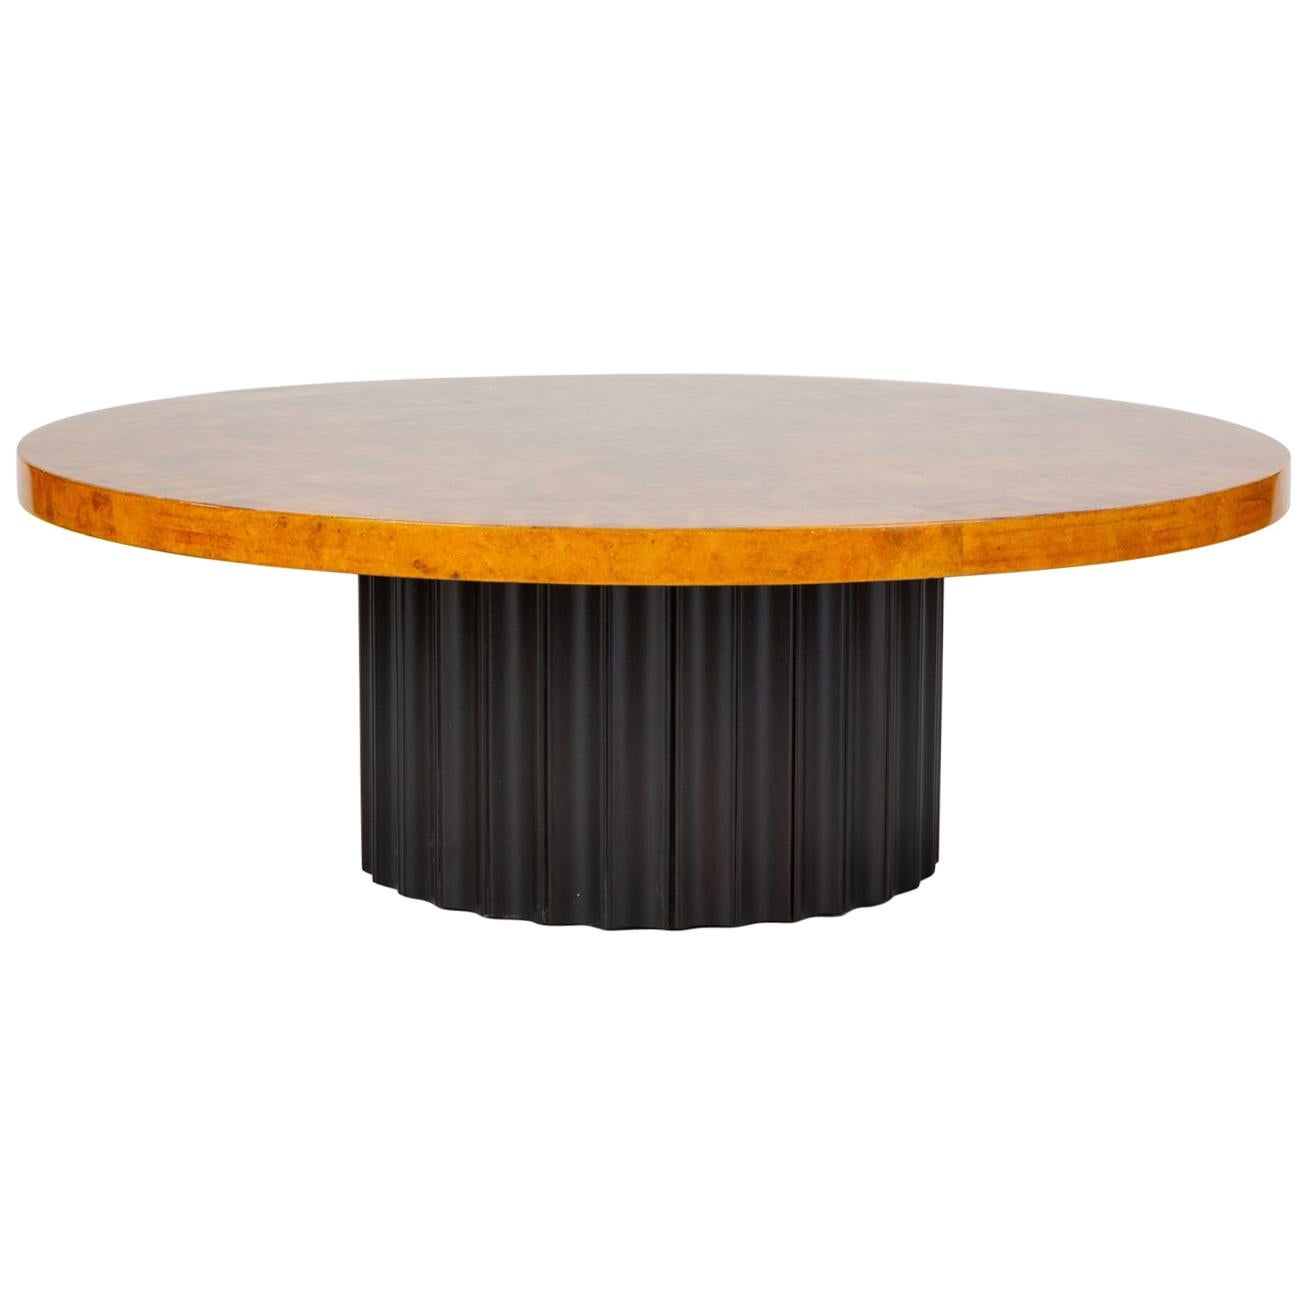 Custom 1970s Round Coffee Table in Lacquered Parchment with Pedestal Base